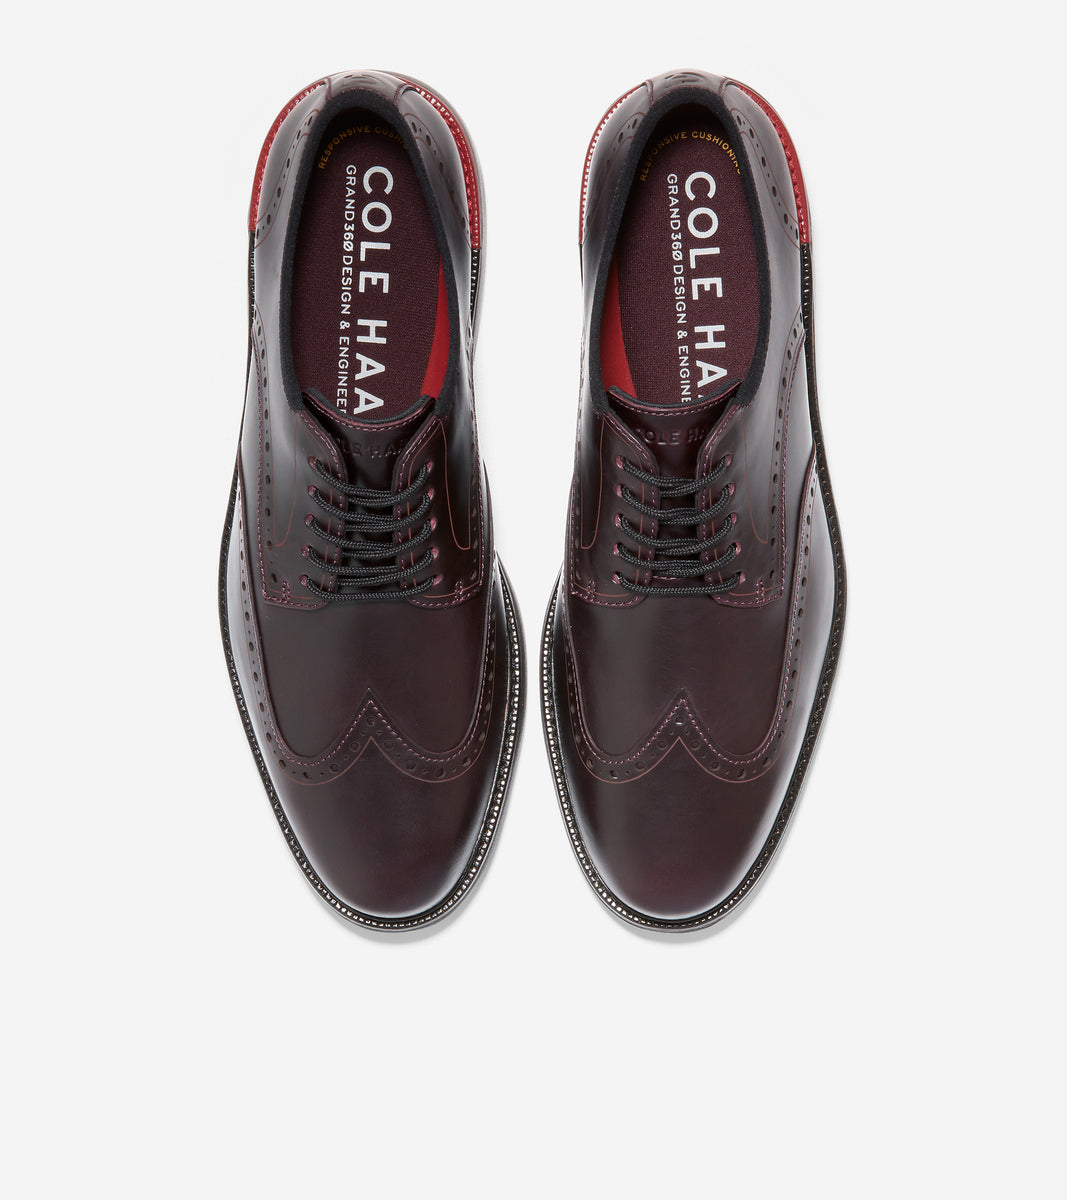 ColeHaan-Grand Ambition Wing Oxford-c34605-Ch Pinot